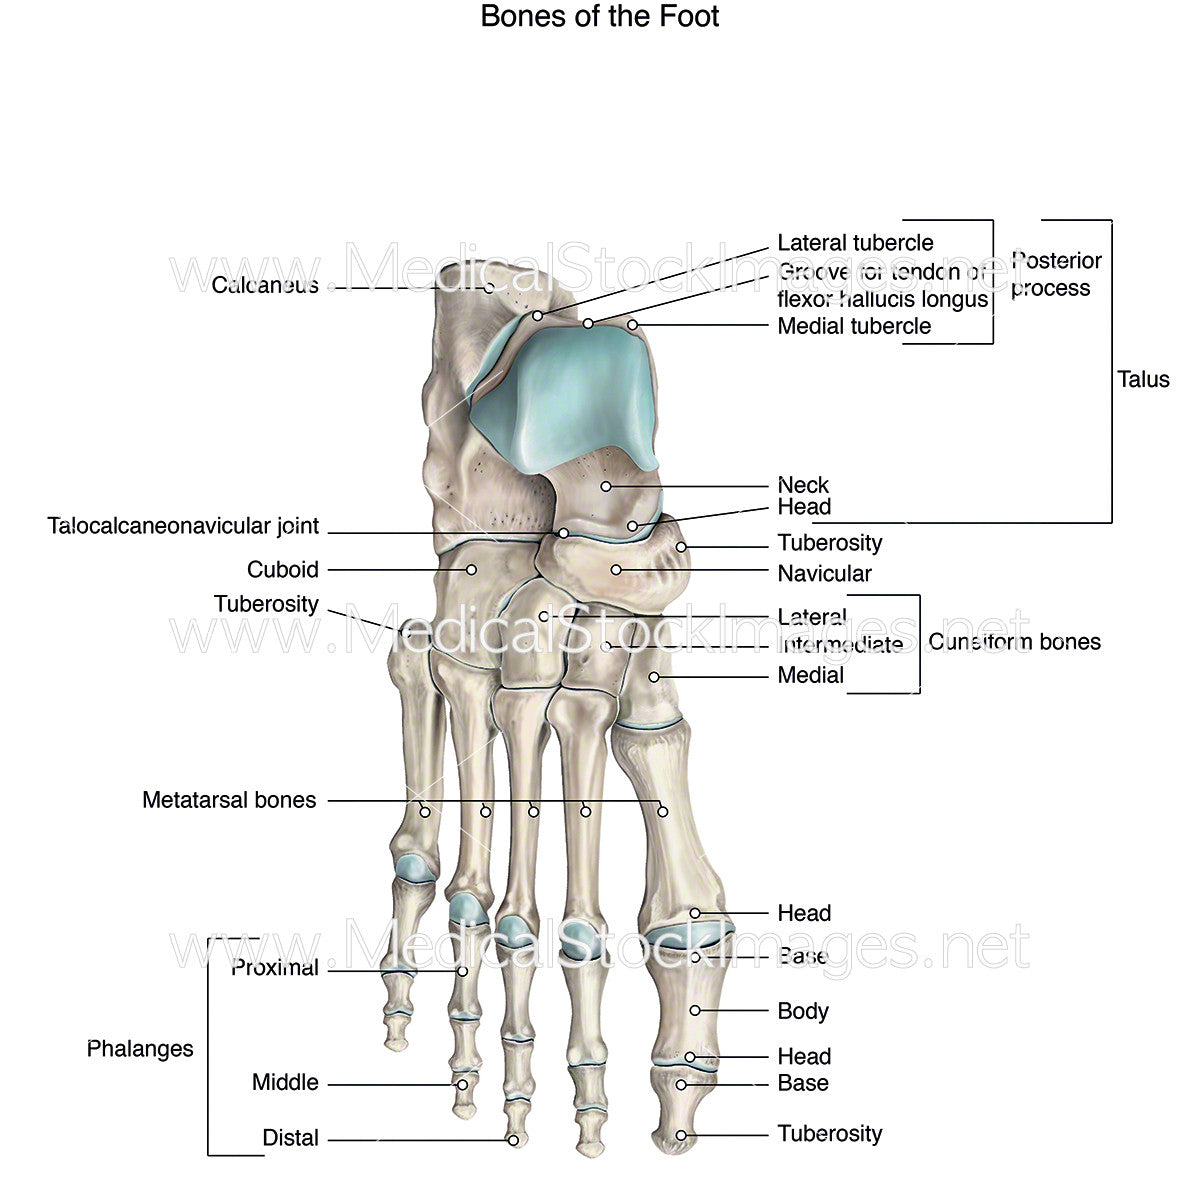 Bones of the Foot – Medical Stock Images Company